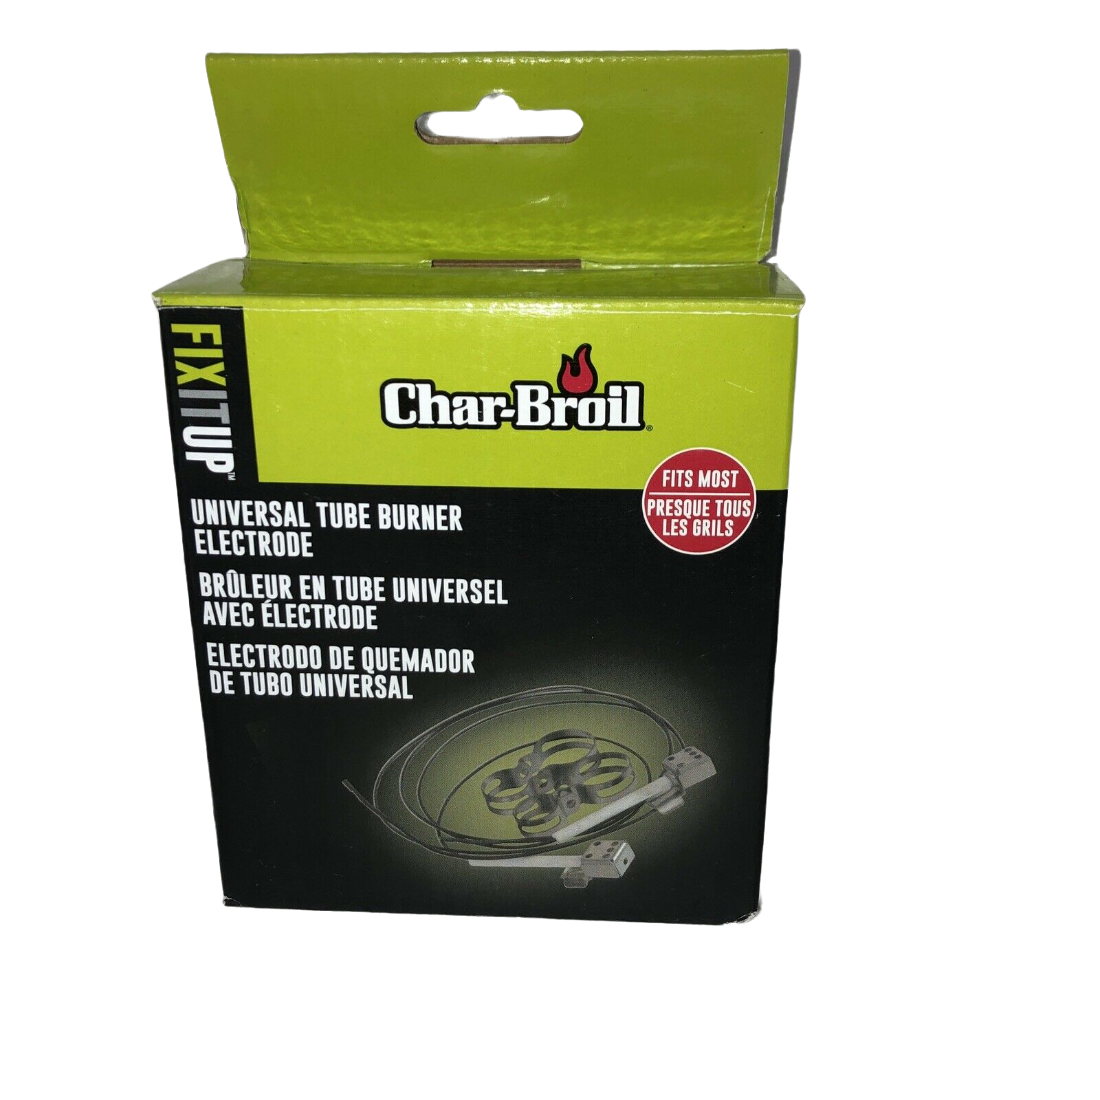 8696429 Char-Broil Universal Electrode Tube Burner Fits Most Grills Replacement - $9.90